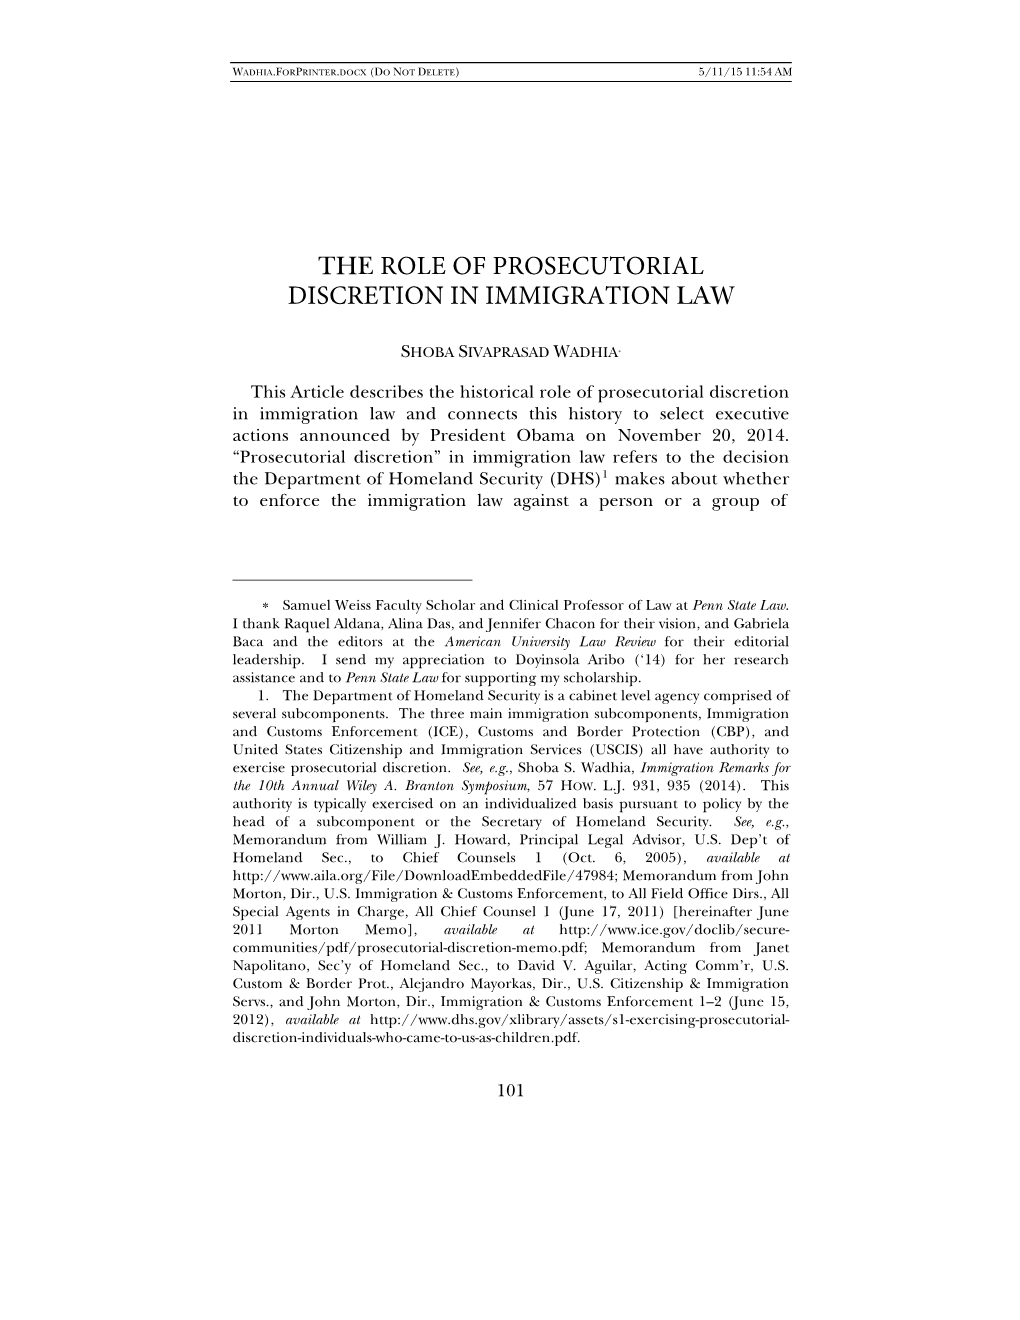 The Role of Prosecutorial Discretion in Immigration Law